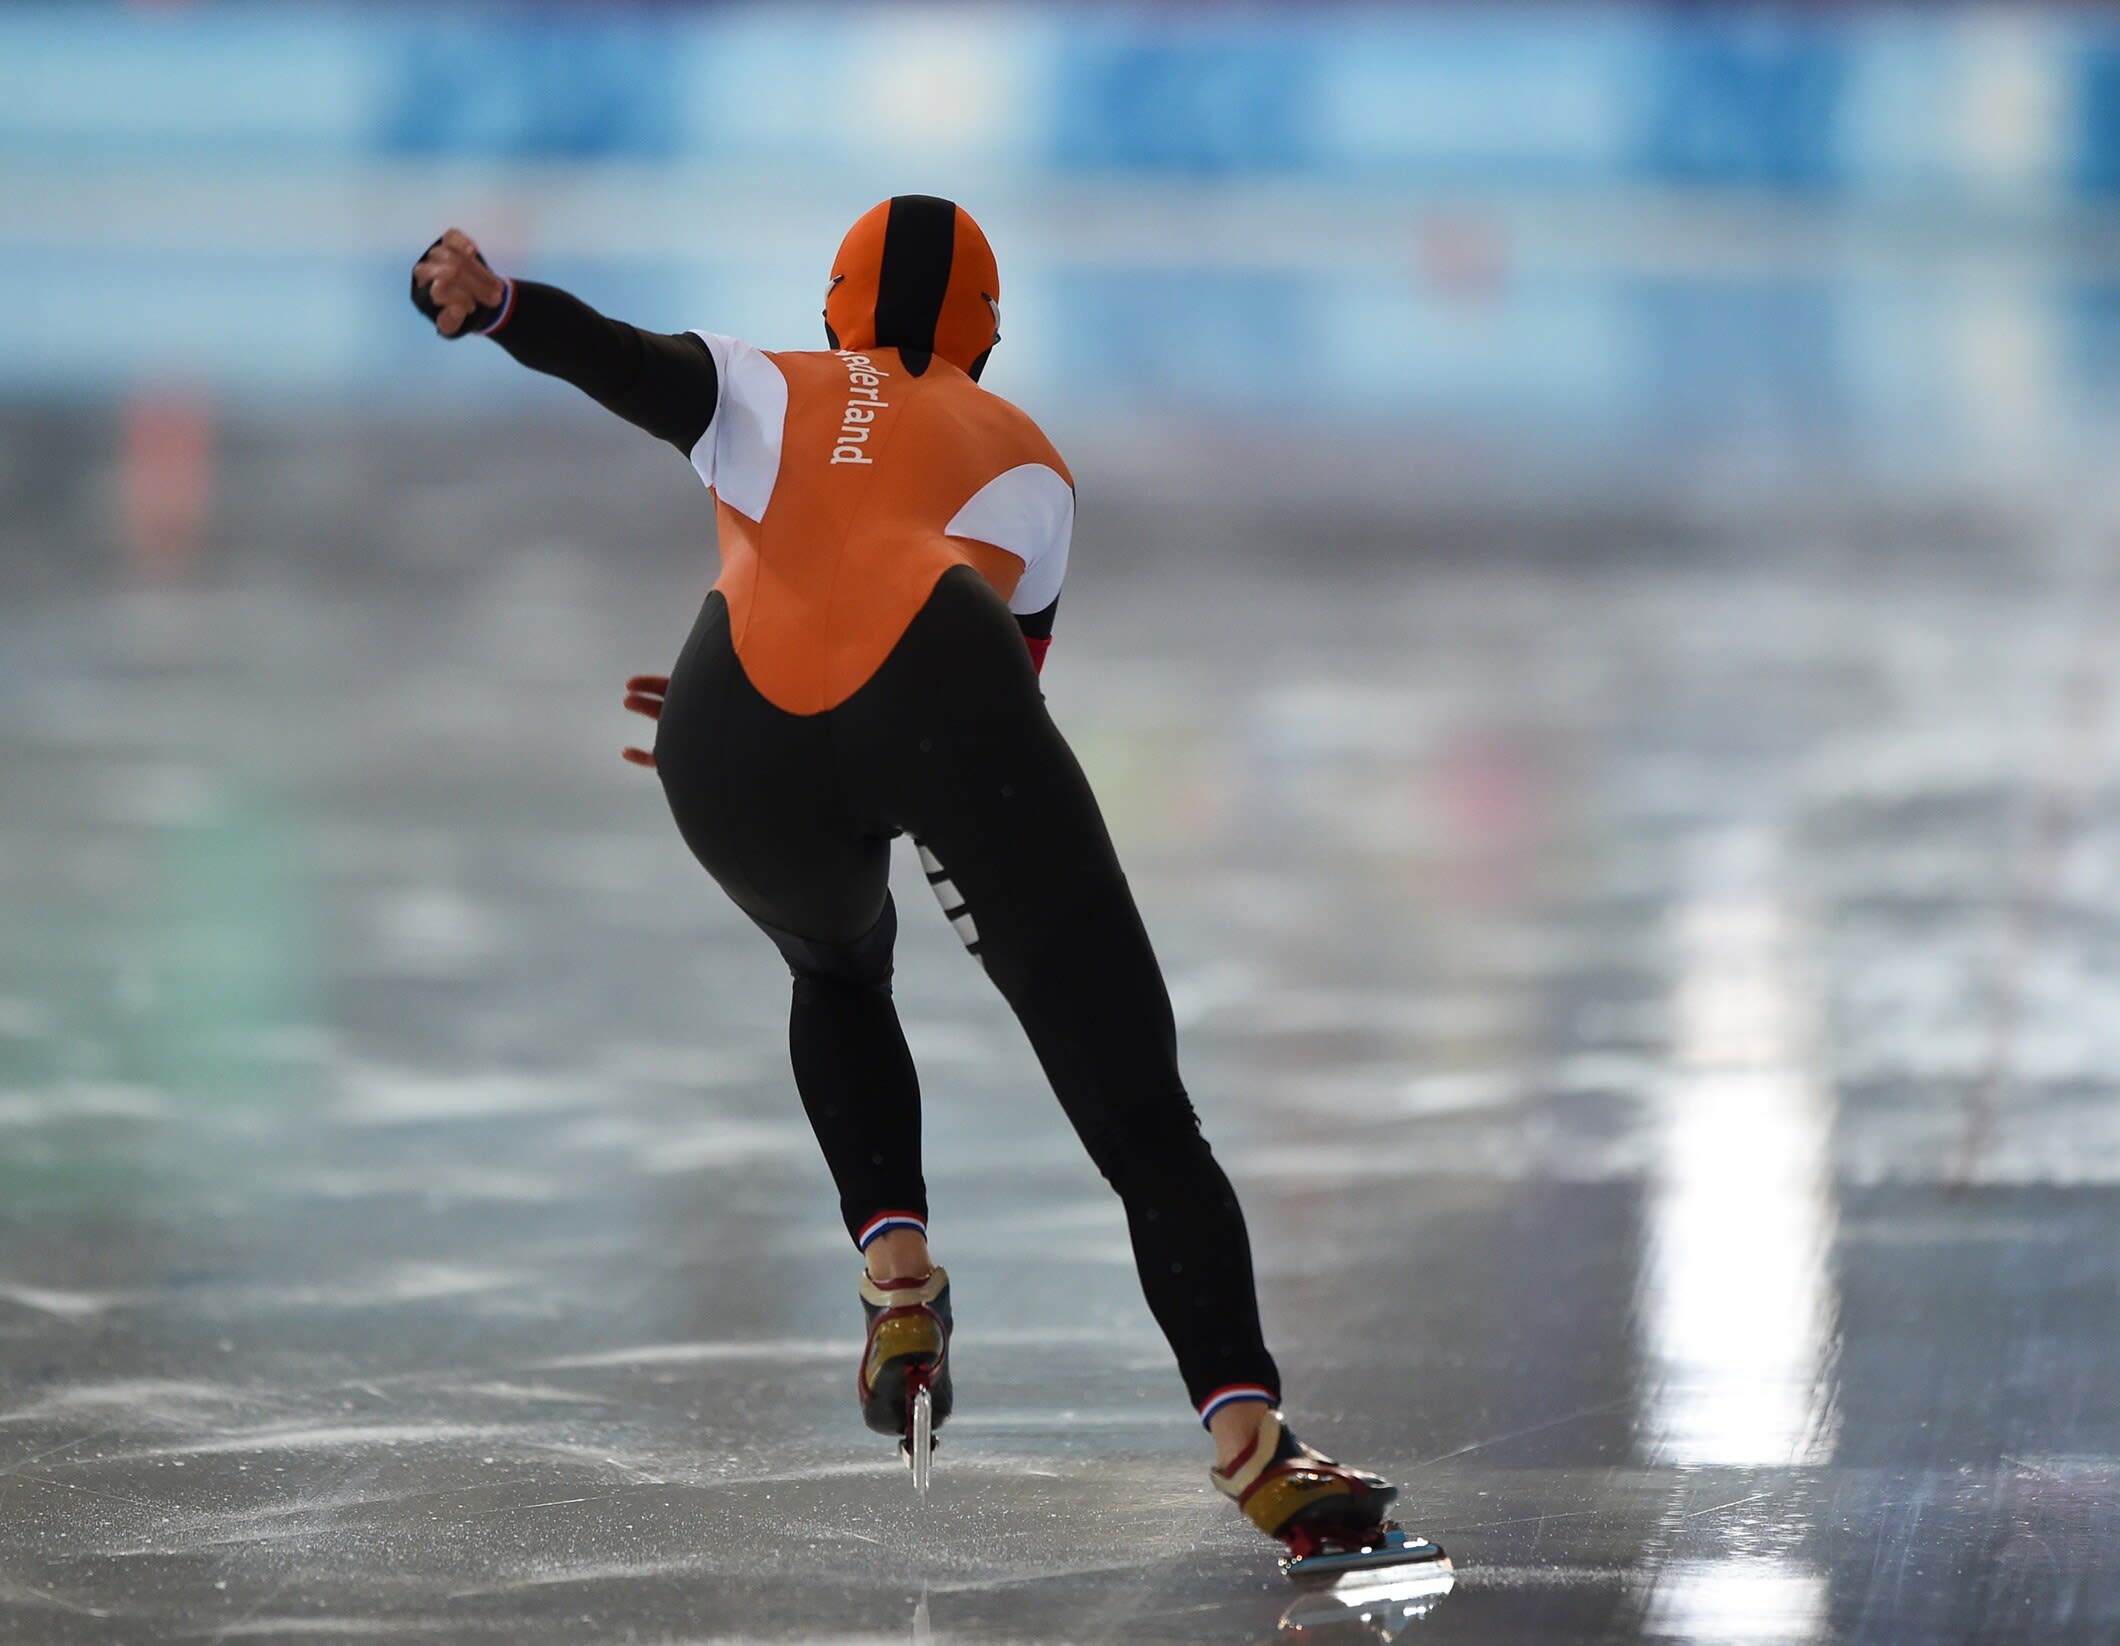 Elisa Dul of the Netherlands competes in the ladies' 1500m speed skating final at Hamar Olympic Hall Viking Ship. Photo: YIS / IOC Thomas Lovelock